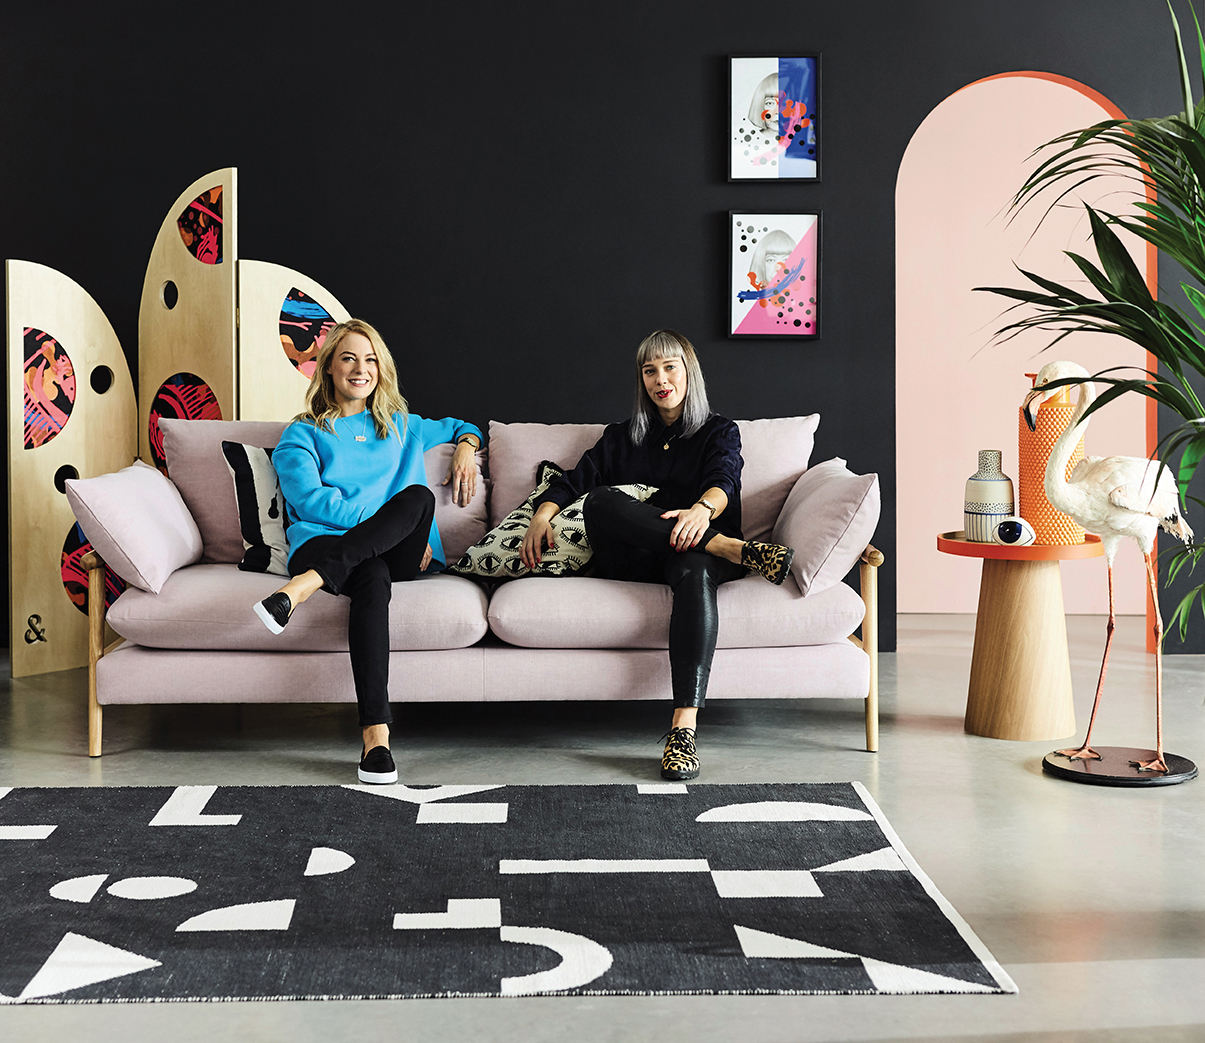 Image of Jill & Gill on the Hoxton sofa from DFS